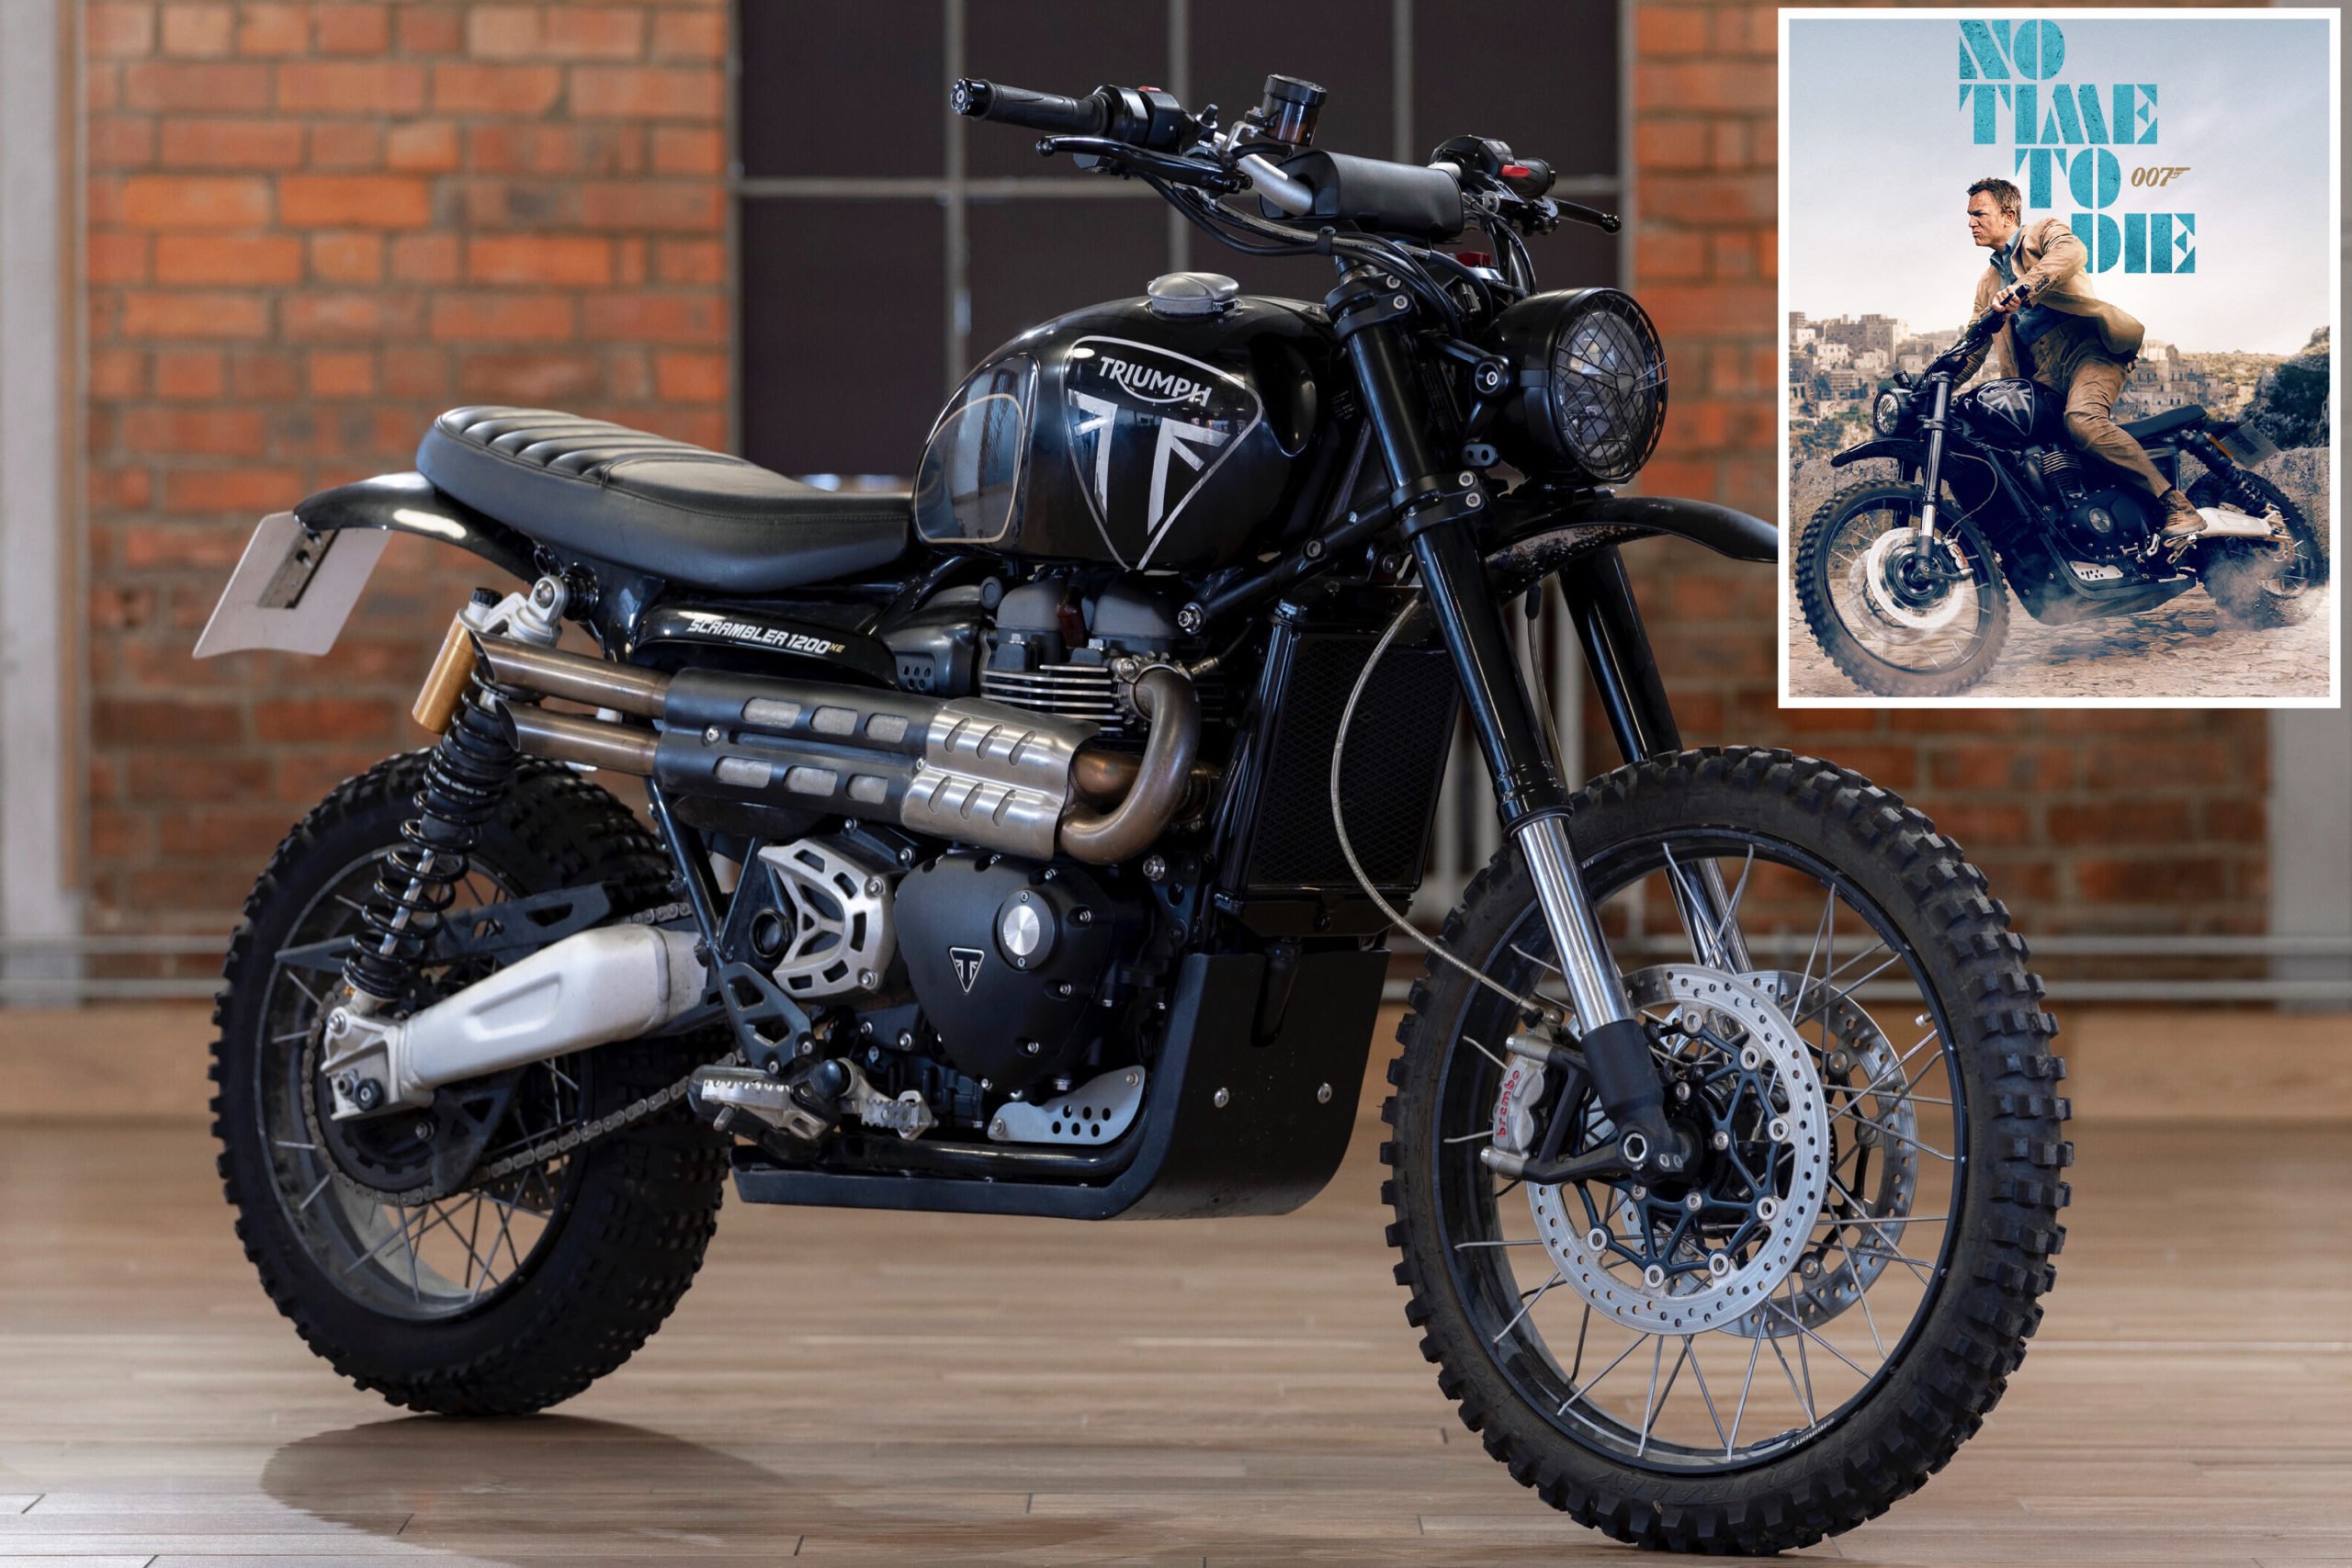 The Triumph Scrambler Stunt Motorcycle From James Bond’s “No Time To Die”